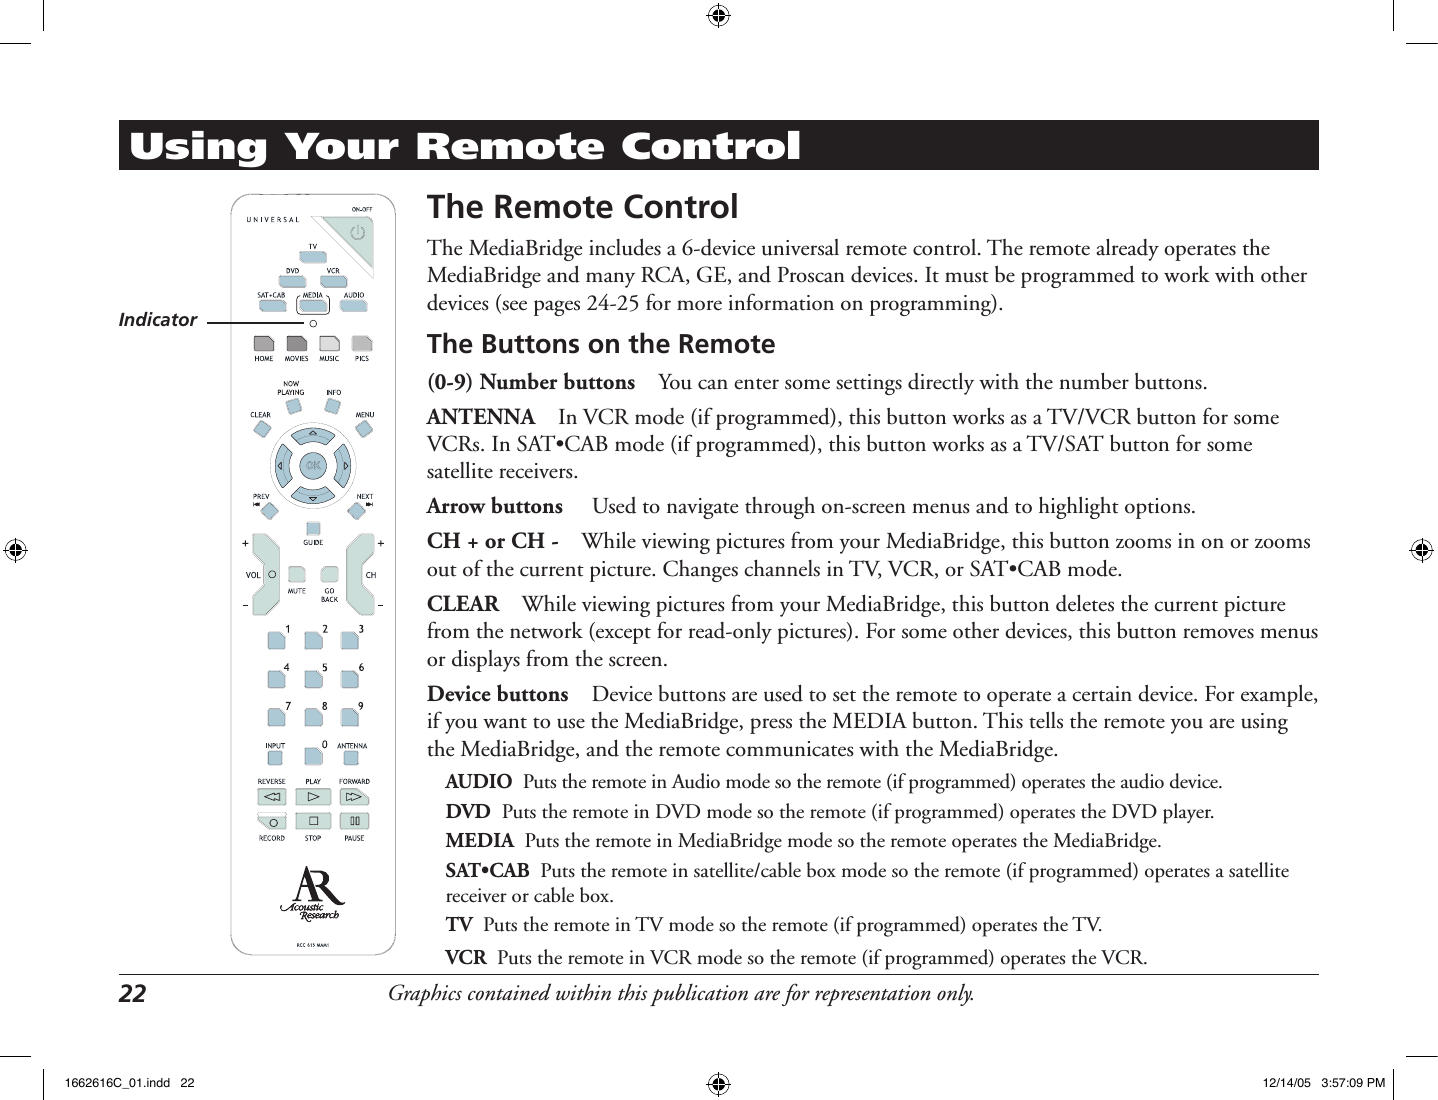 Graphics contained within this publication are for representation only.22 Using Your Remote ControlThe Remote ControlThe MediaBridge includes a 6-device universal remote control. The remote already operates the MediaBridge and many RCA, GE, and Proscan devices. It must be programmed to work with other devices (see pages 24-25 for more information on programming).The Buttons on the Remote(0-9) Number buttons  You can enter some settings directly with the number buttons. ANTENNA  In VCR mode (if programmed), this button works as a TV/VCR button for some VCRs. In SAT•CAB mode (if programmed), this button works as a TV/SAT button for some satellite receivers. Arrow buttons   Used to navigate through on-screen menus and to highlight options. CH + or CH -  While viewing pictures from your MediaBridge, this button zooms in on or zooms out of the current picture. Changes channels in TV, VCR, or SAT•CAB mode.CLEAR  While viewing pictures from your MediaBridge, this button deletes the current picture from the network (except for read-only pictures). For some other devices, this button removes menus or displays from the screen. Device buttons  Device buttons are used to set the remote to operate a certain device. For example, if you want to use the MediaBridge, press the MEDIA button. This tells the remote you are using the MediaBridge, and the remote communicates with the MediaBridge.AUDIO  Puts the remote in Audio mode so the remote (if programmed) operates the audio device.DVD  Puts the remote in DVD mode so the remote (if programmed) operates the DVD player.MEDIA  Puts the remote in MediaBridge mode so the remote operates the MediaBridge.SAT•CAB  Puts the remote in satellite/cable box mode so the remote (if programmed) operates a satellite receiver or cable box.TV  Puts the remote in TV mode so the remote (if programmed) operates the TV.VCR  Puts the remote in VCR mode so the remote (if programmed) operates the VCR.Indicator1662616C_01.indd   22 12/14/05   3:57:09 PM